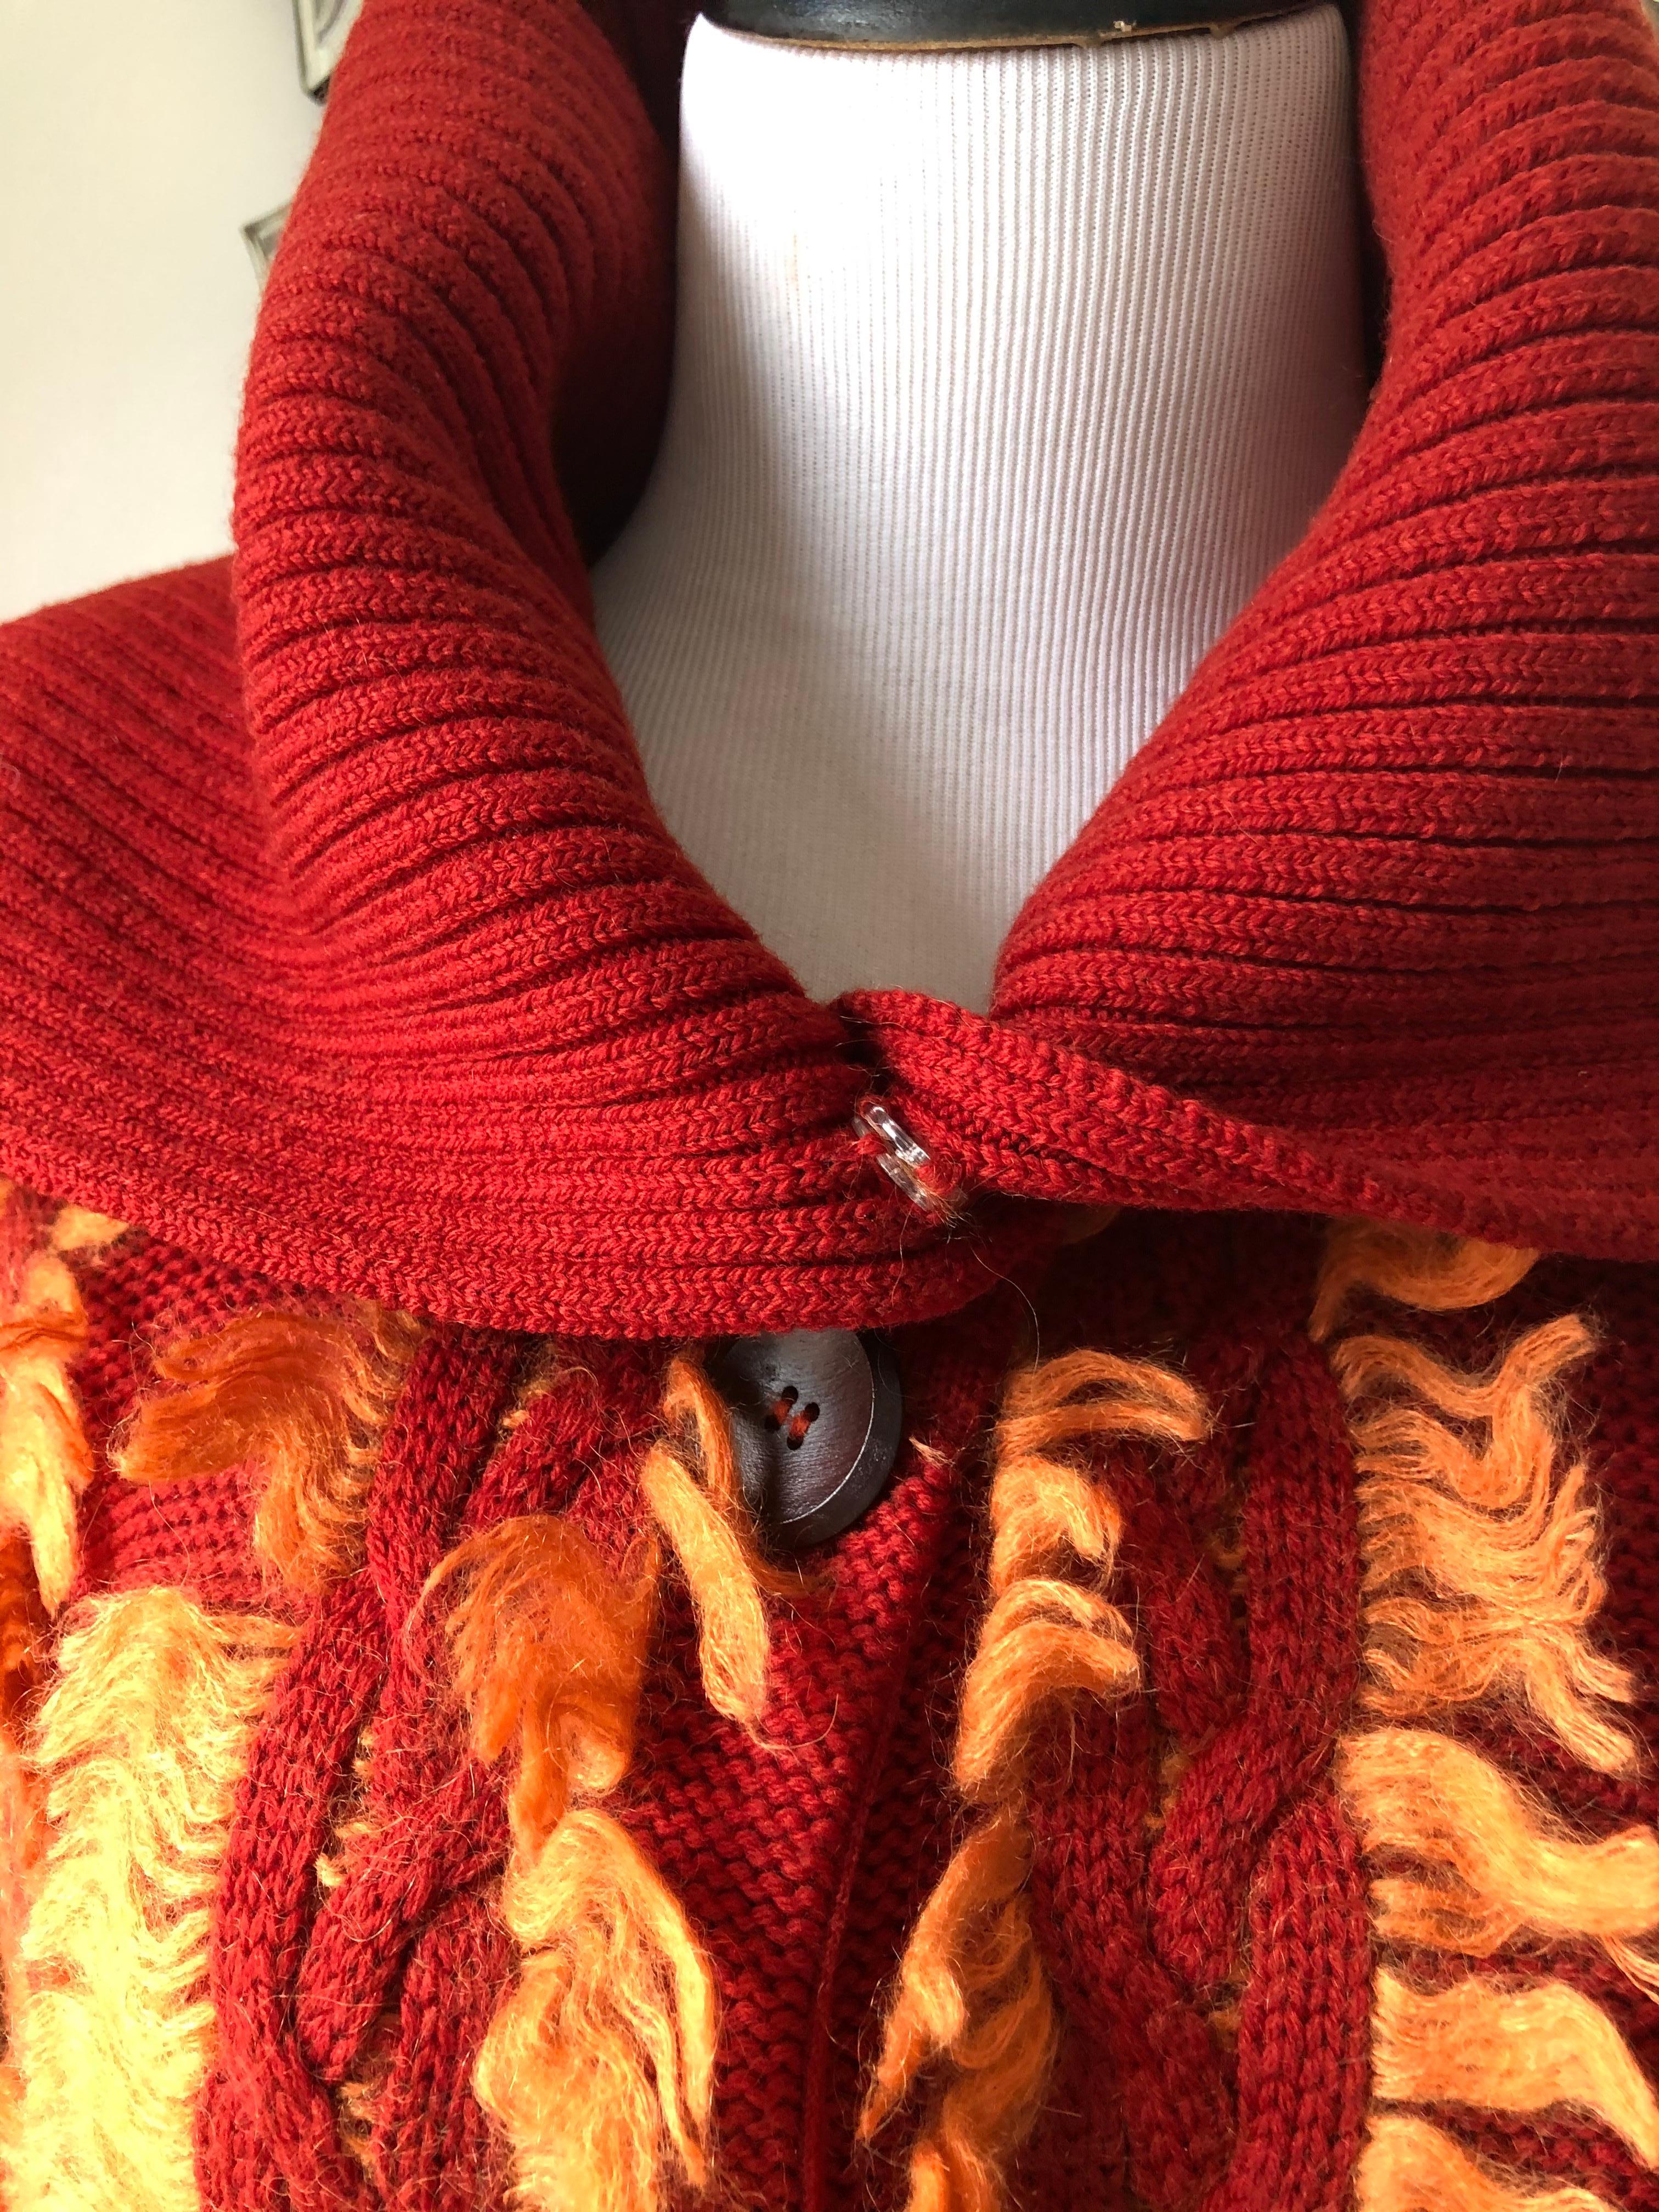 Gorgeous heavy knit in a brilliant burnt 2 tone orange.
Button front with large fringed collar. Unfinished wool ruffled like edges.
Big sleeves with cuffs.
Very good condition
Measurements
Length          20